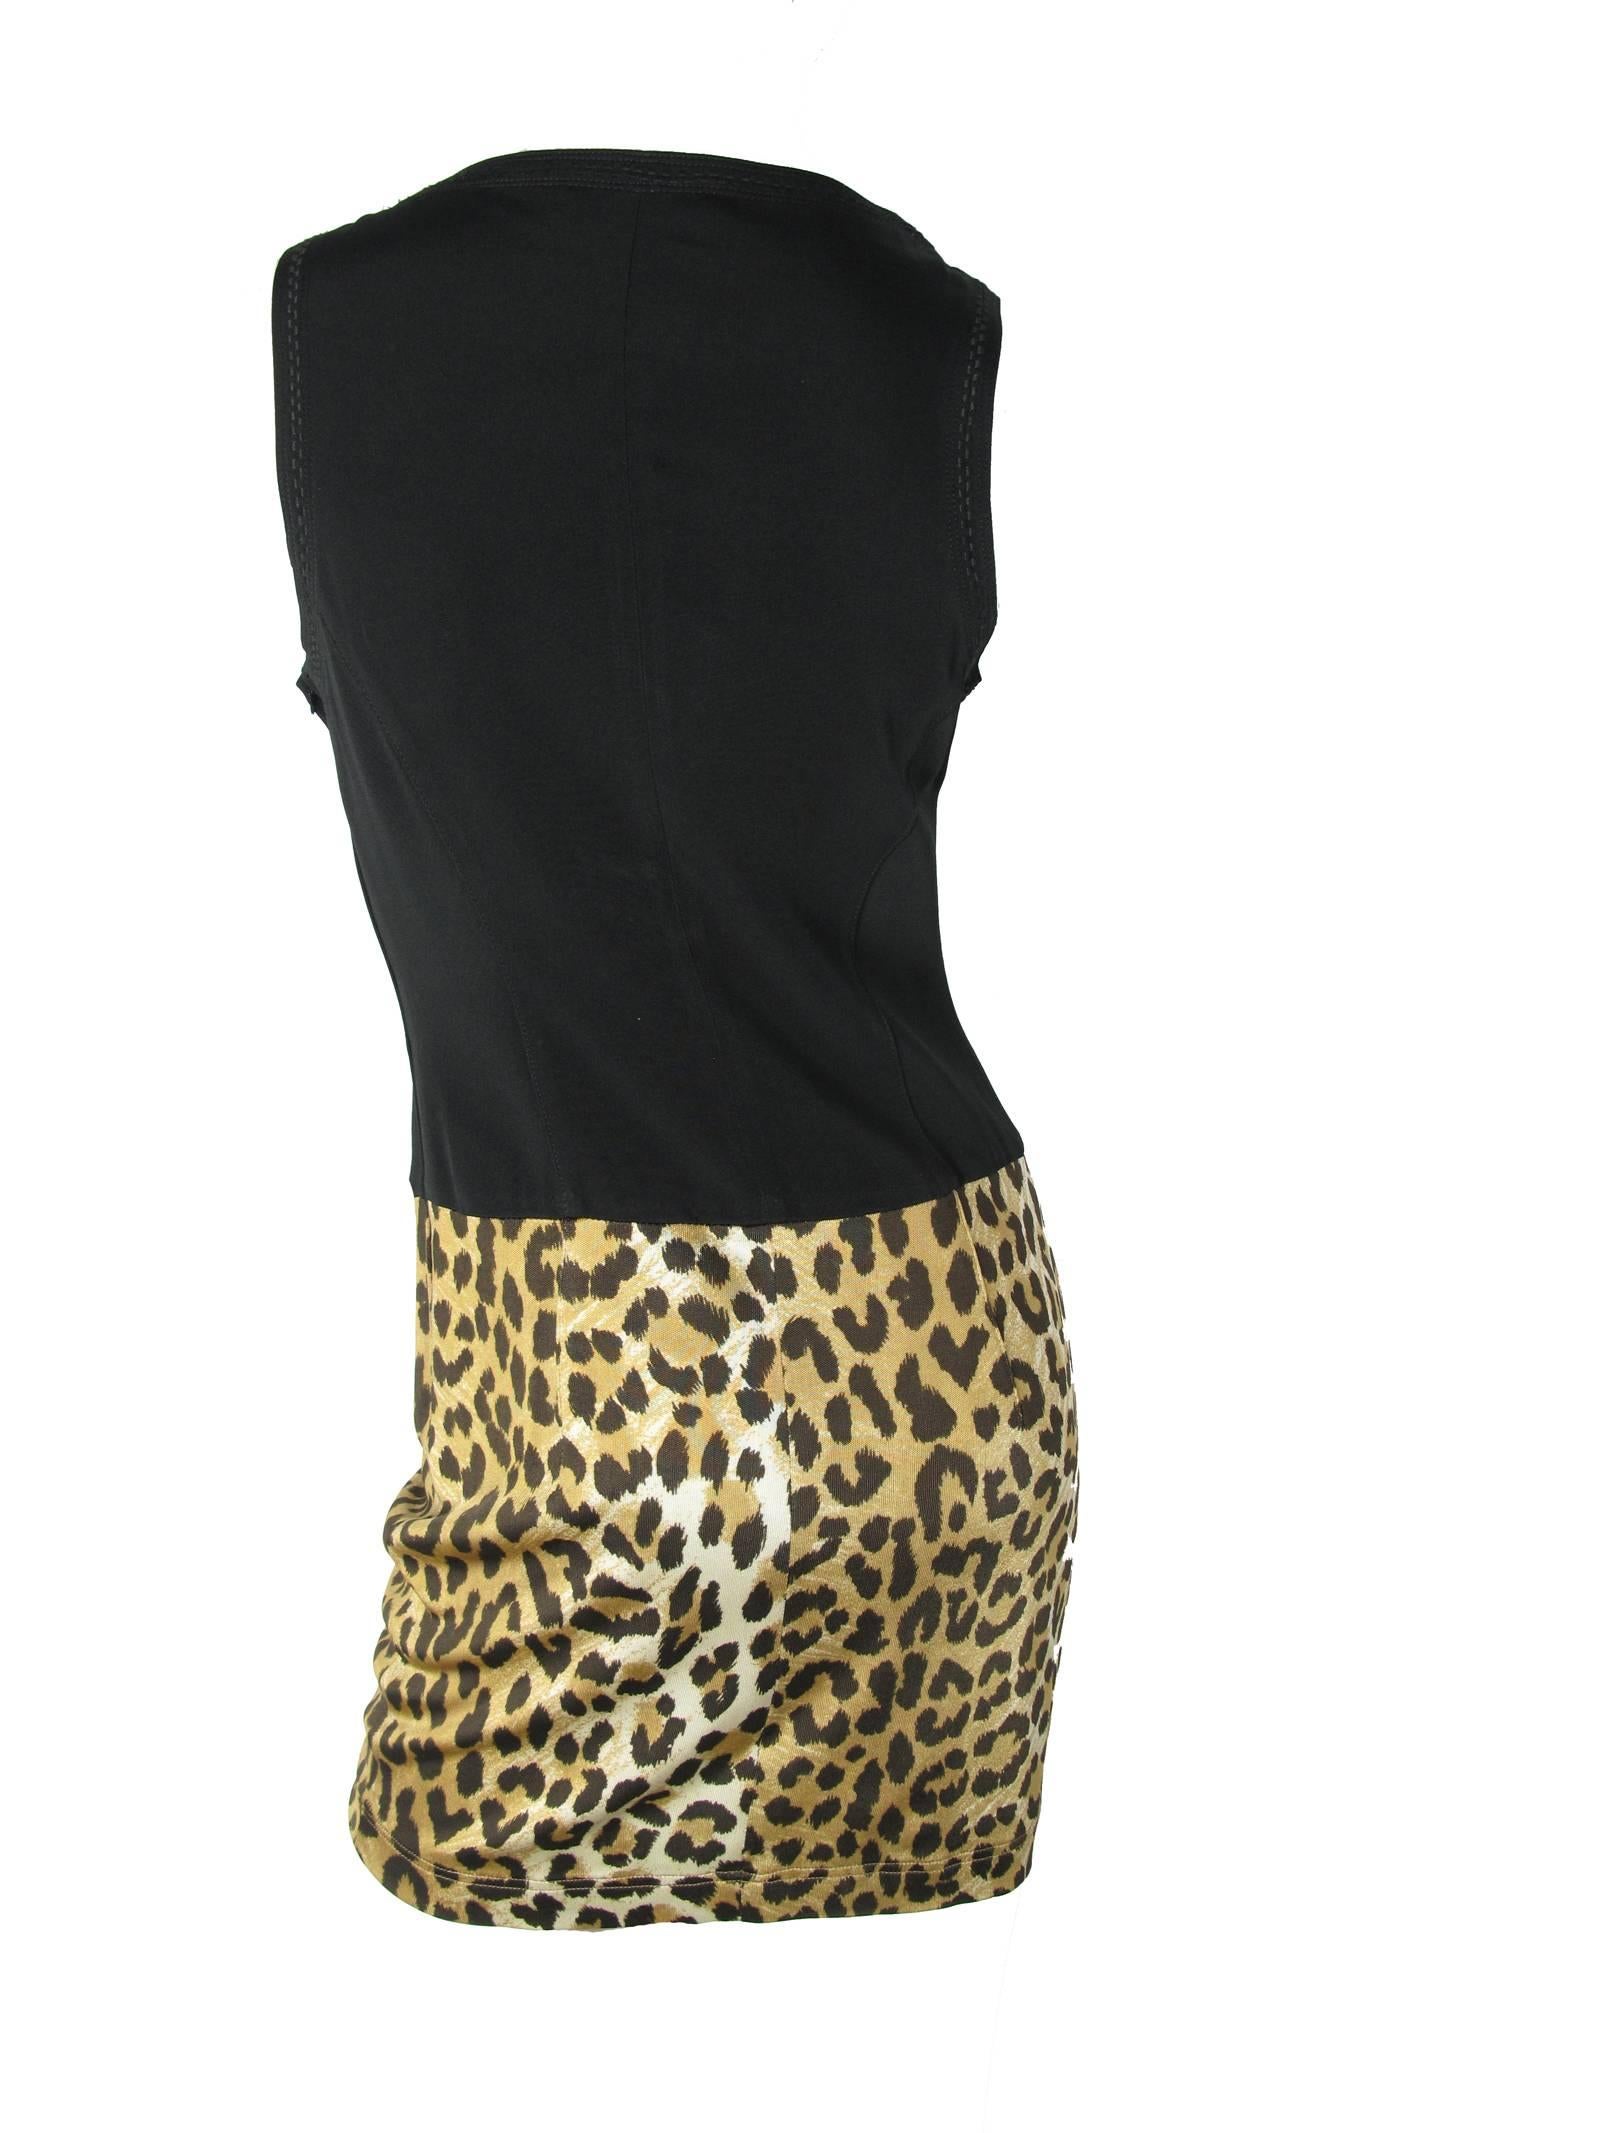 1990s Ozbek black and leopard dress. Stretchy lycra material, no fabric label.  Size 8     34